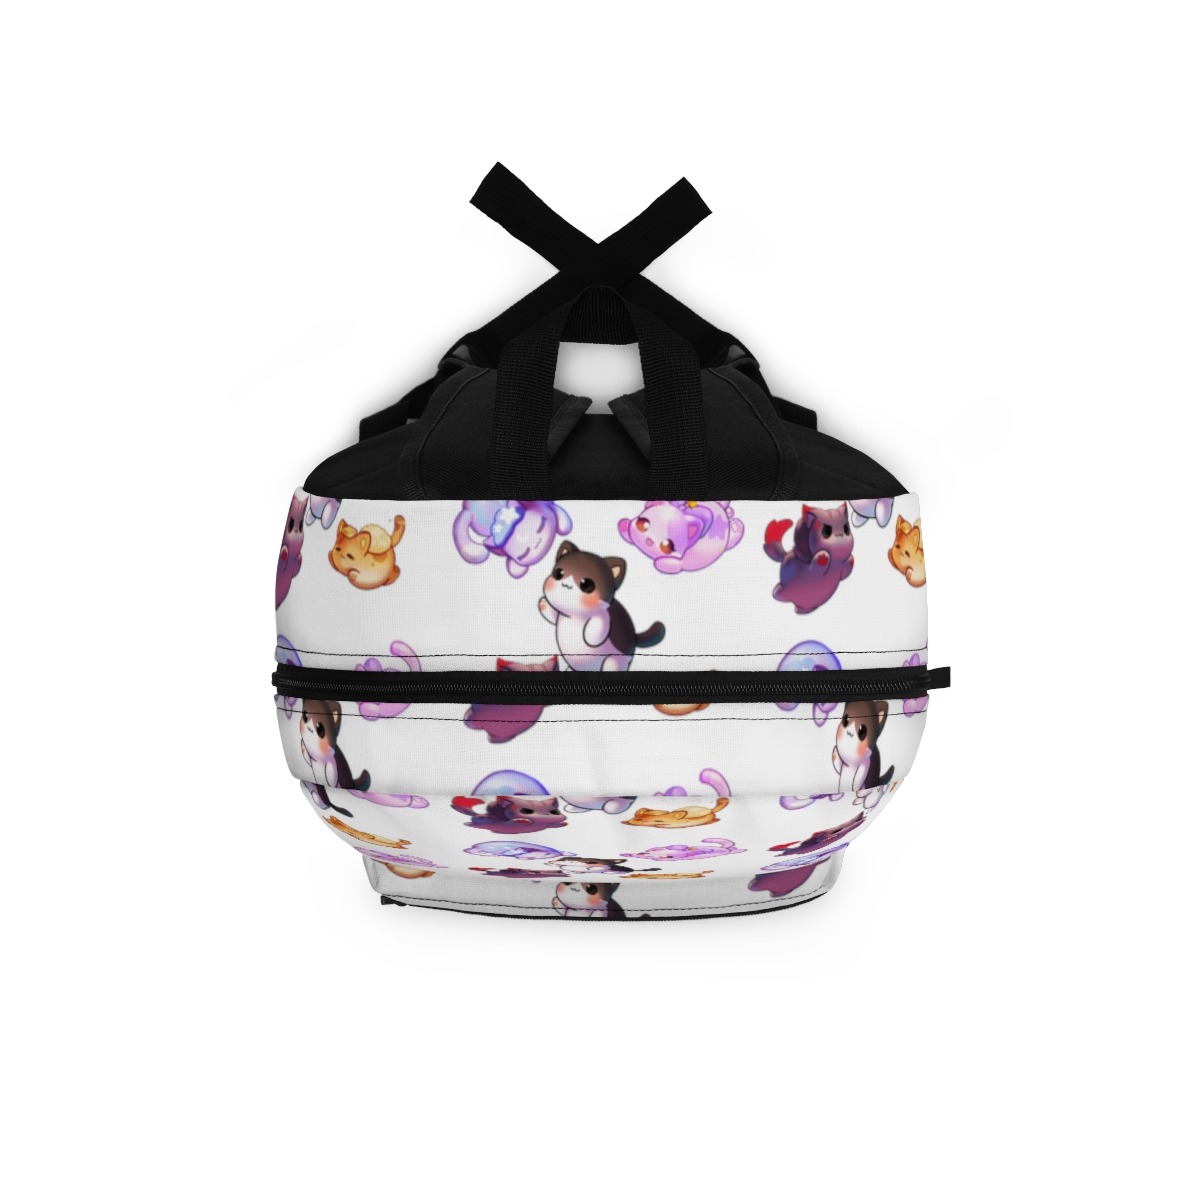 Aphmau on X: Mystreet Neko~Themed backpack and lunchbox! SUPER CUTE  CHARACTER CATS UGH! 💜 Available here❗️   / X